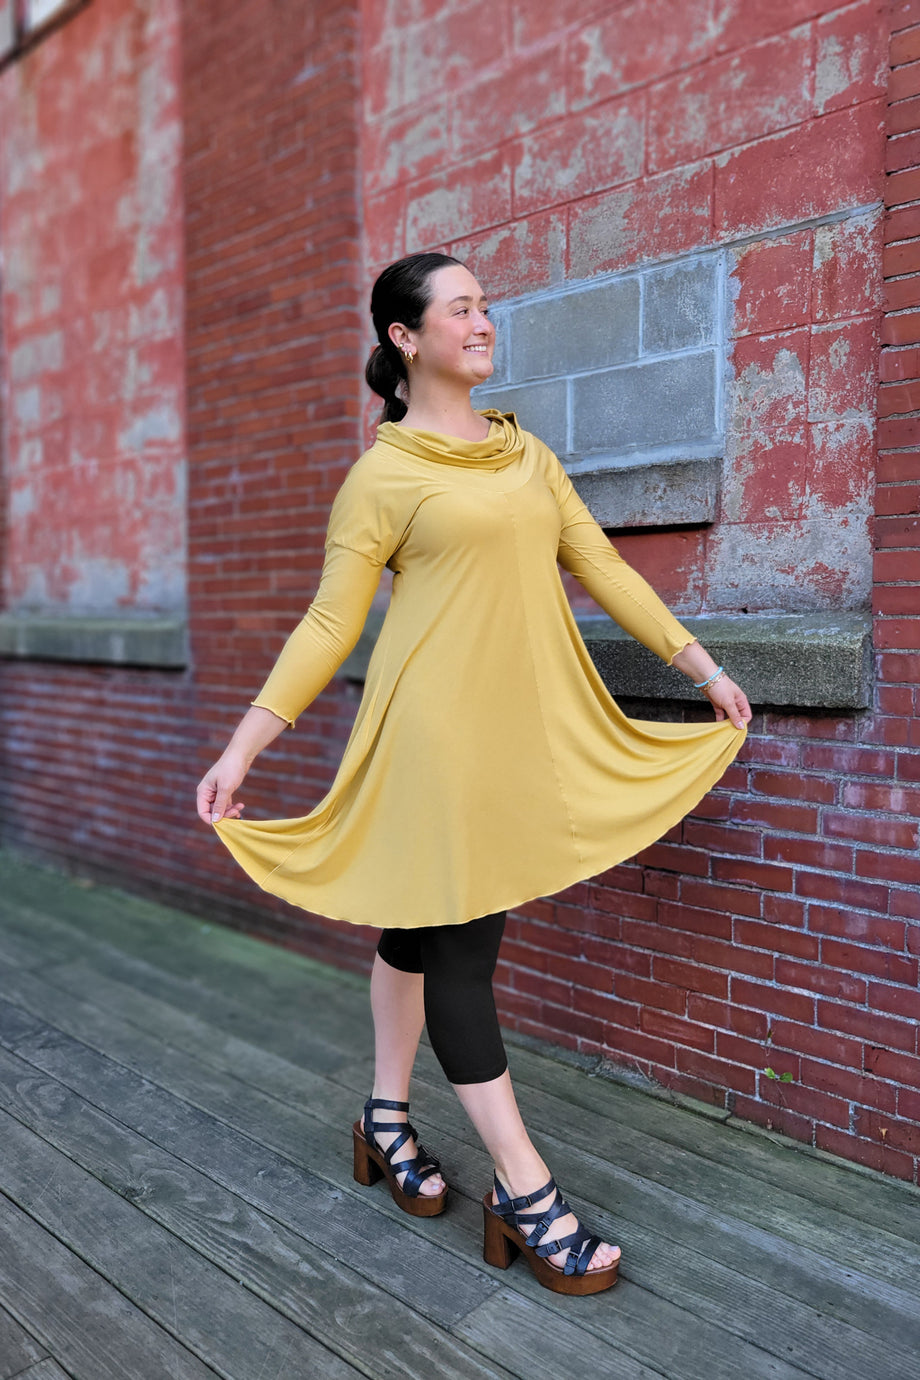 GALE cowl neck tunic dress – angelrox